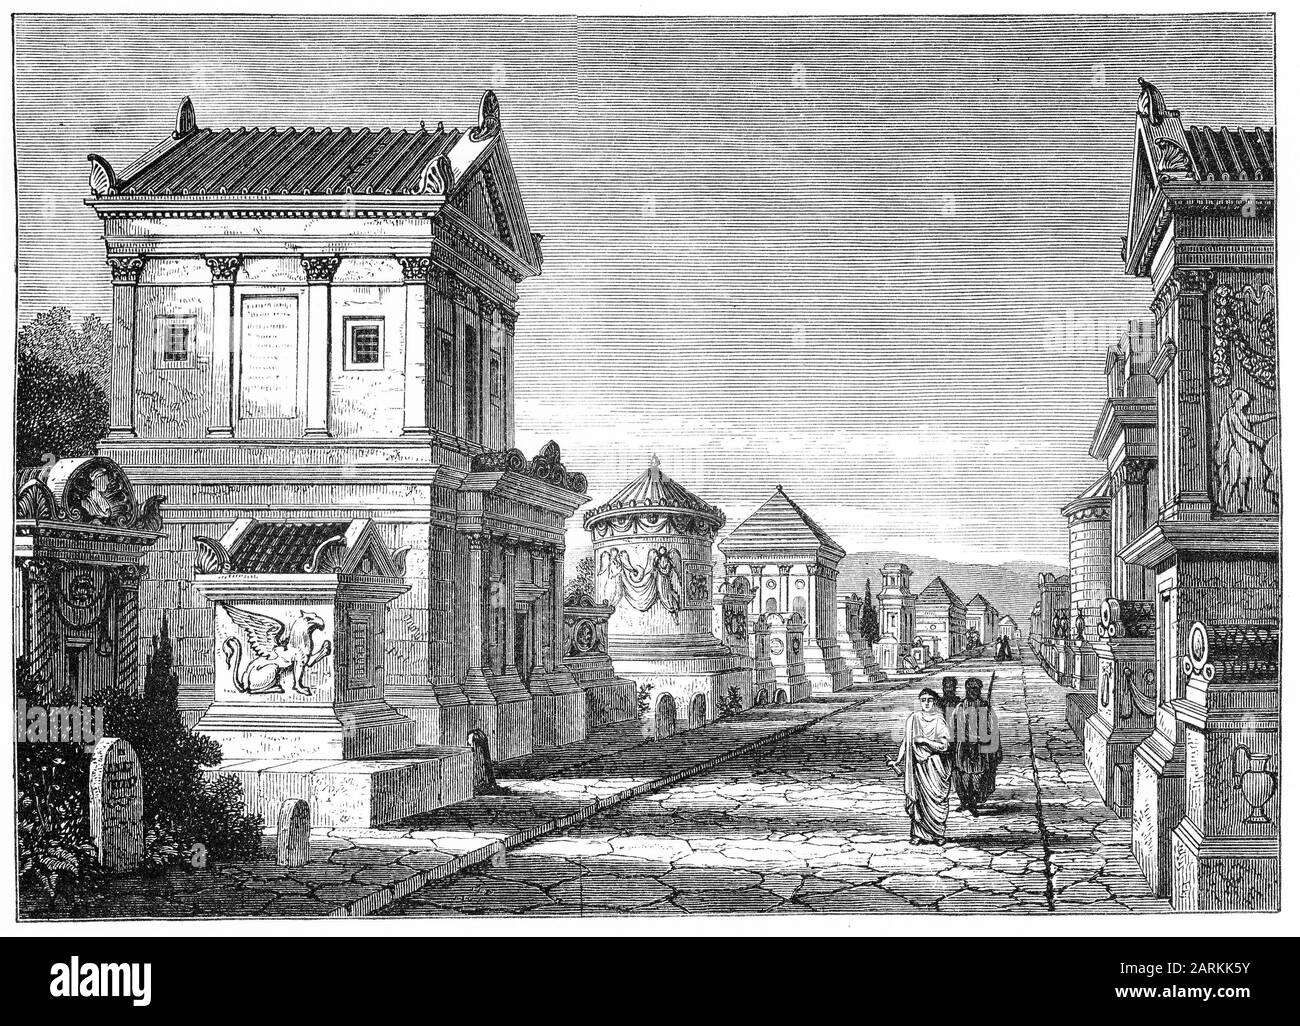 Engraving of restoration work accomplished on the via appia 5 miles from Rome in the late 1800s. Stock Photo